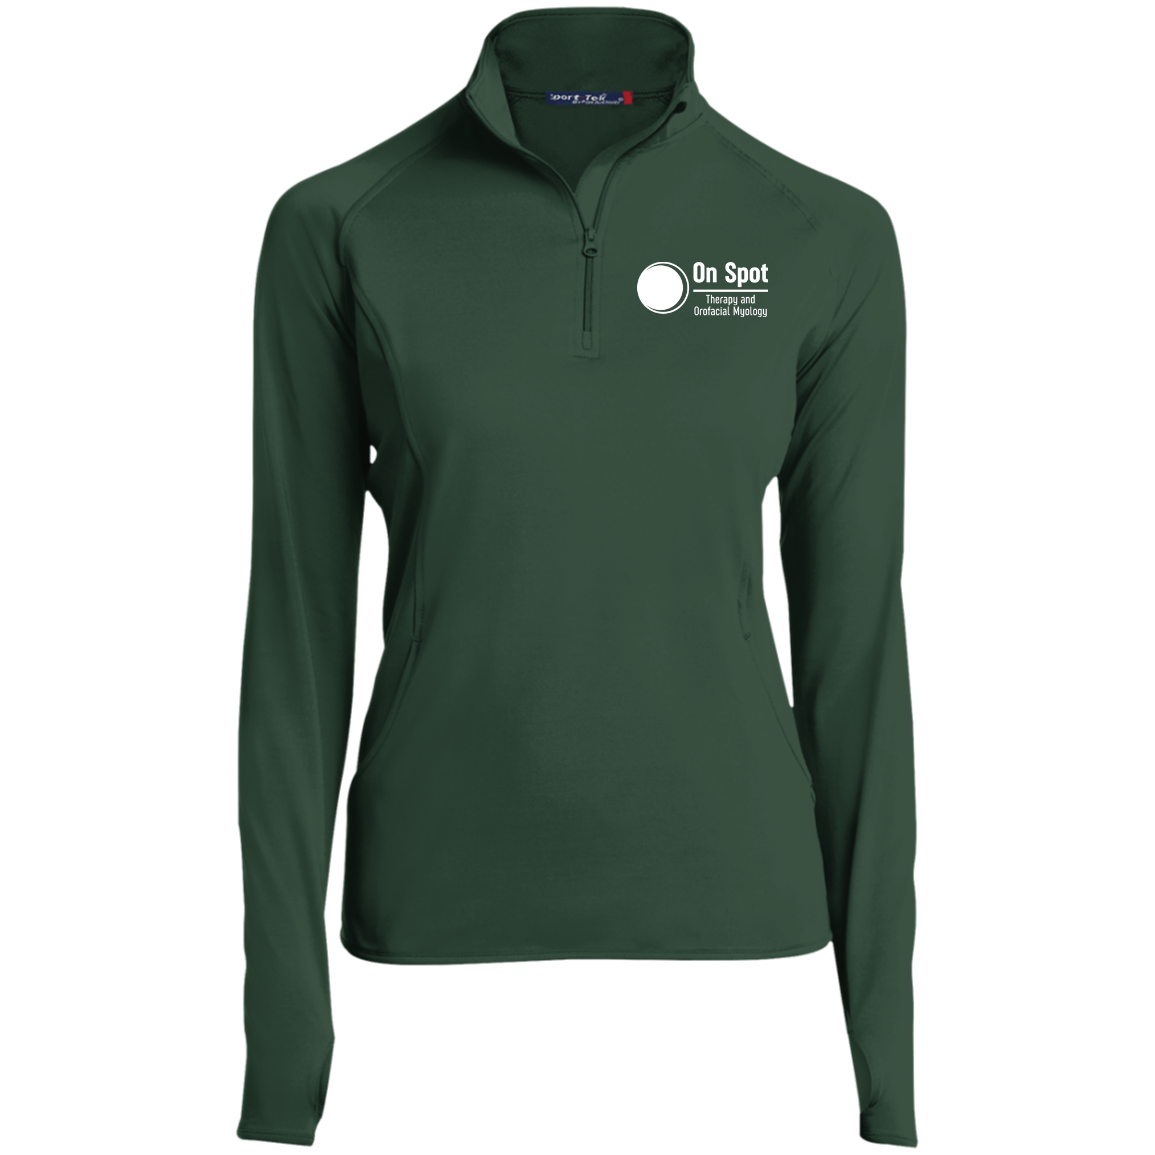 OS Womens 1/2 Zip Performance Pullover